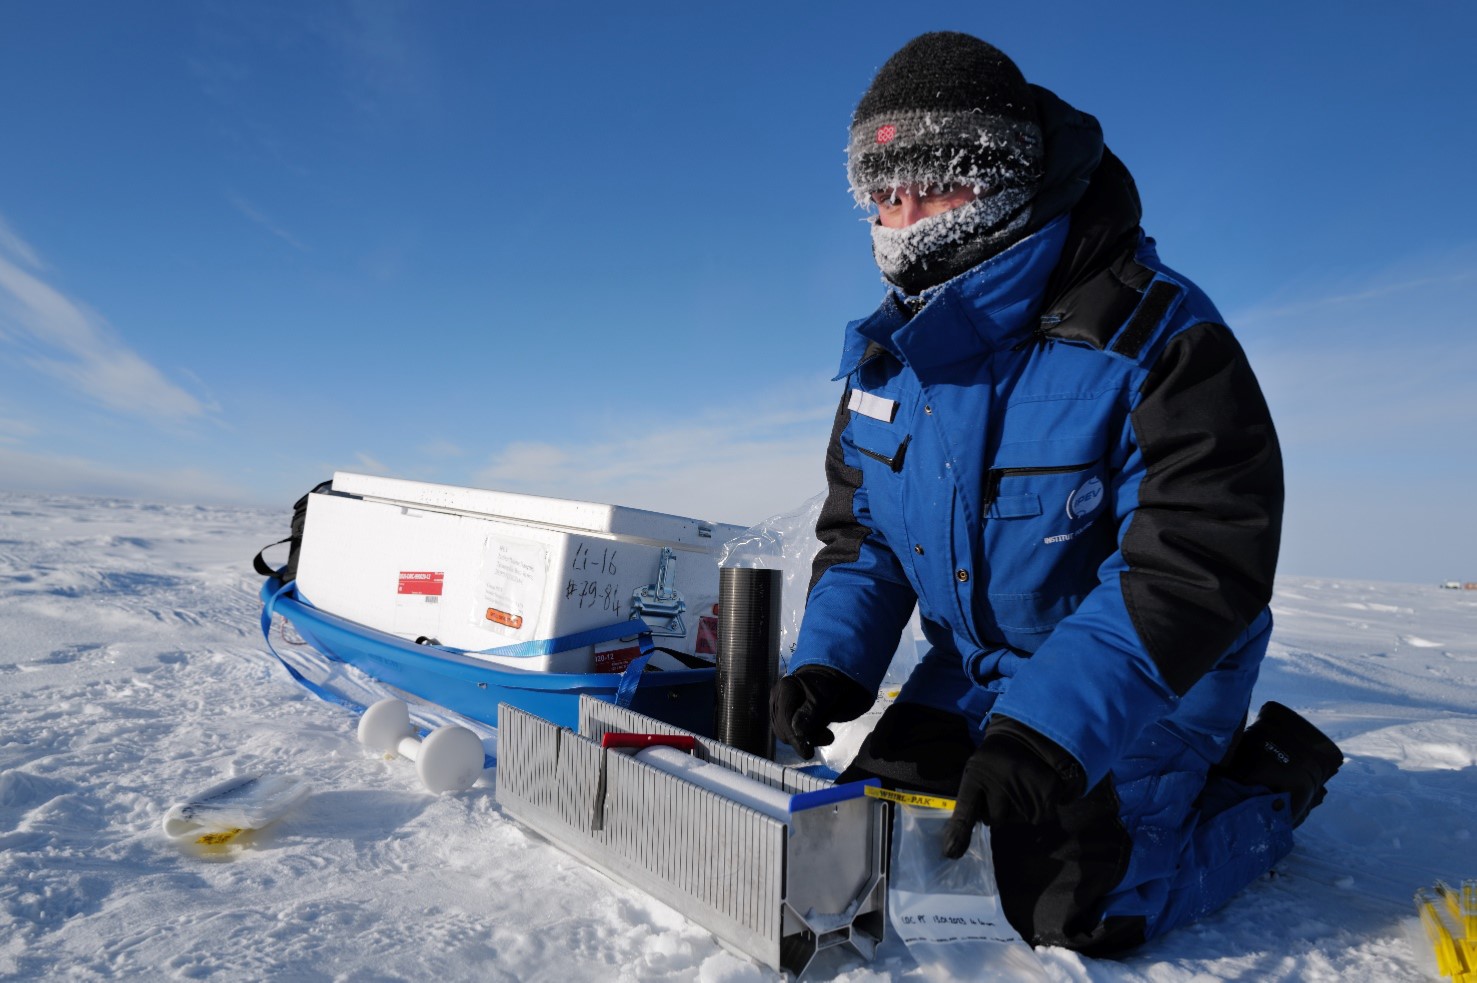 Romilly collects a series of 30 cm short cores along a photogrammetry transect several times during the season, cutting the cores into 10 mm samples. The project is designed to follow the development of the snow surface topography and stable water isotopes during the season